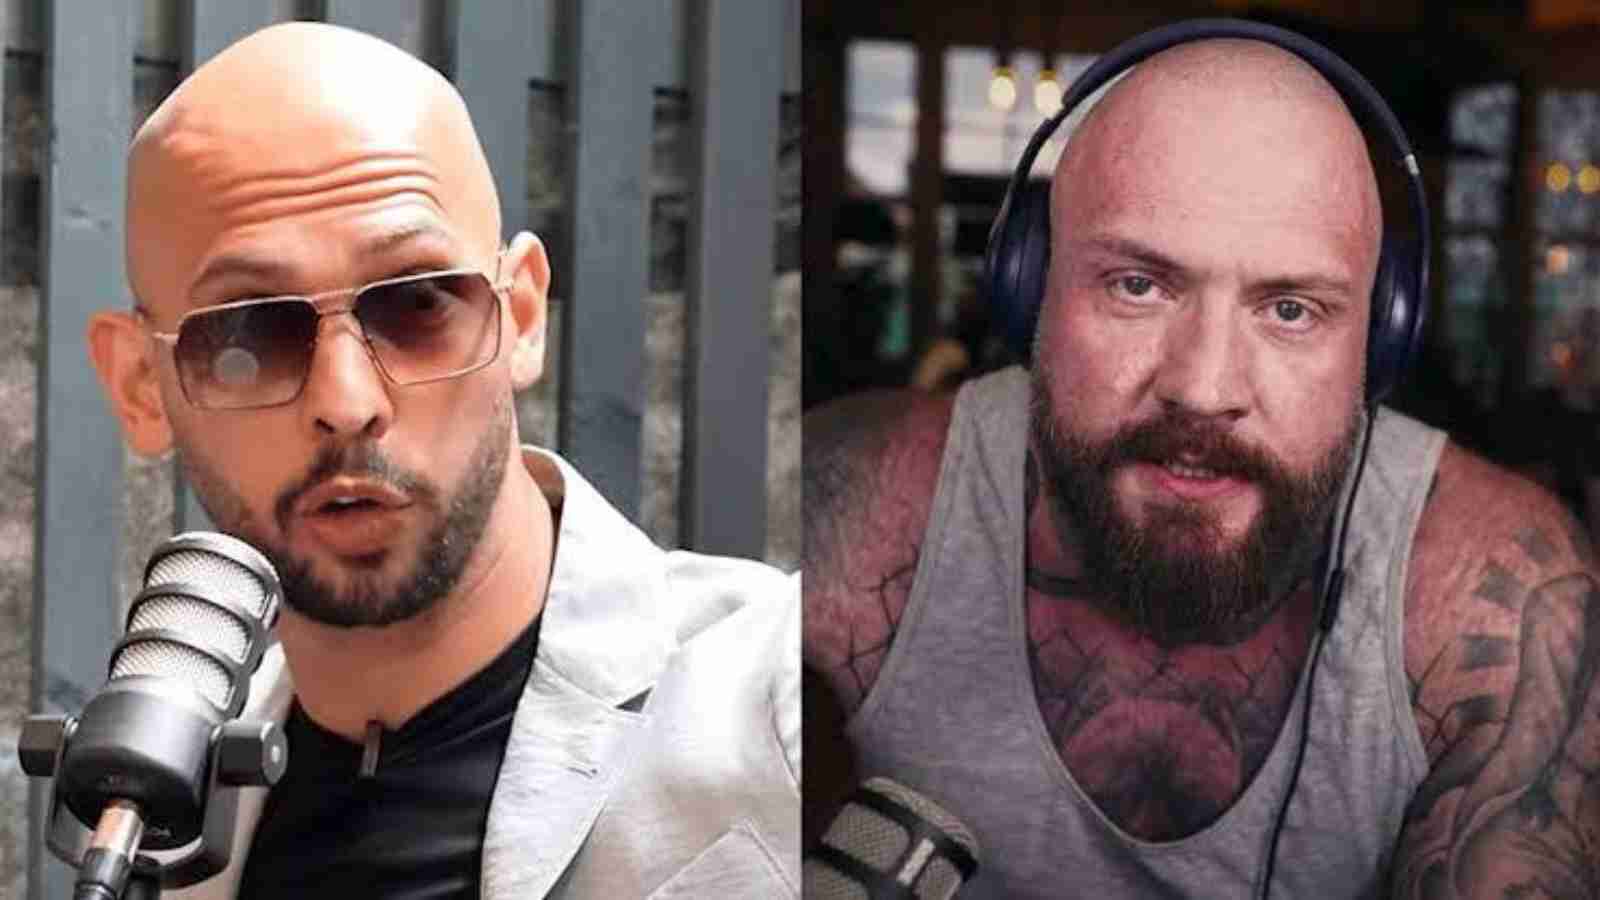 Andrew Tate and YouTuber True Geordie get into a fight after Geordie makes islamophobic comments